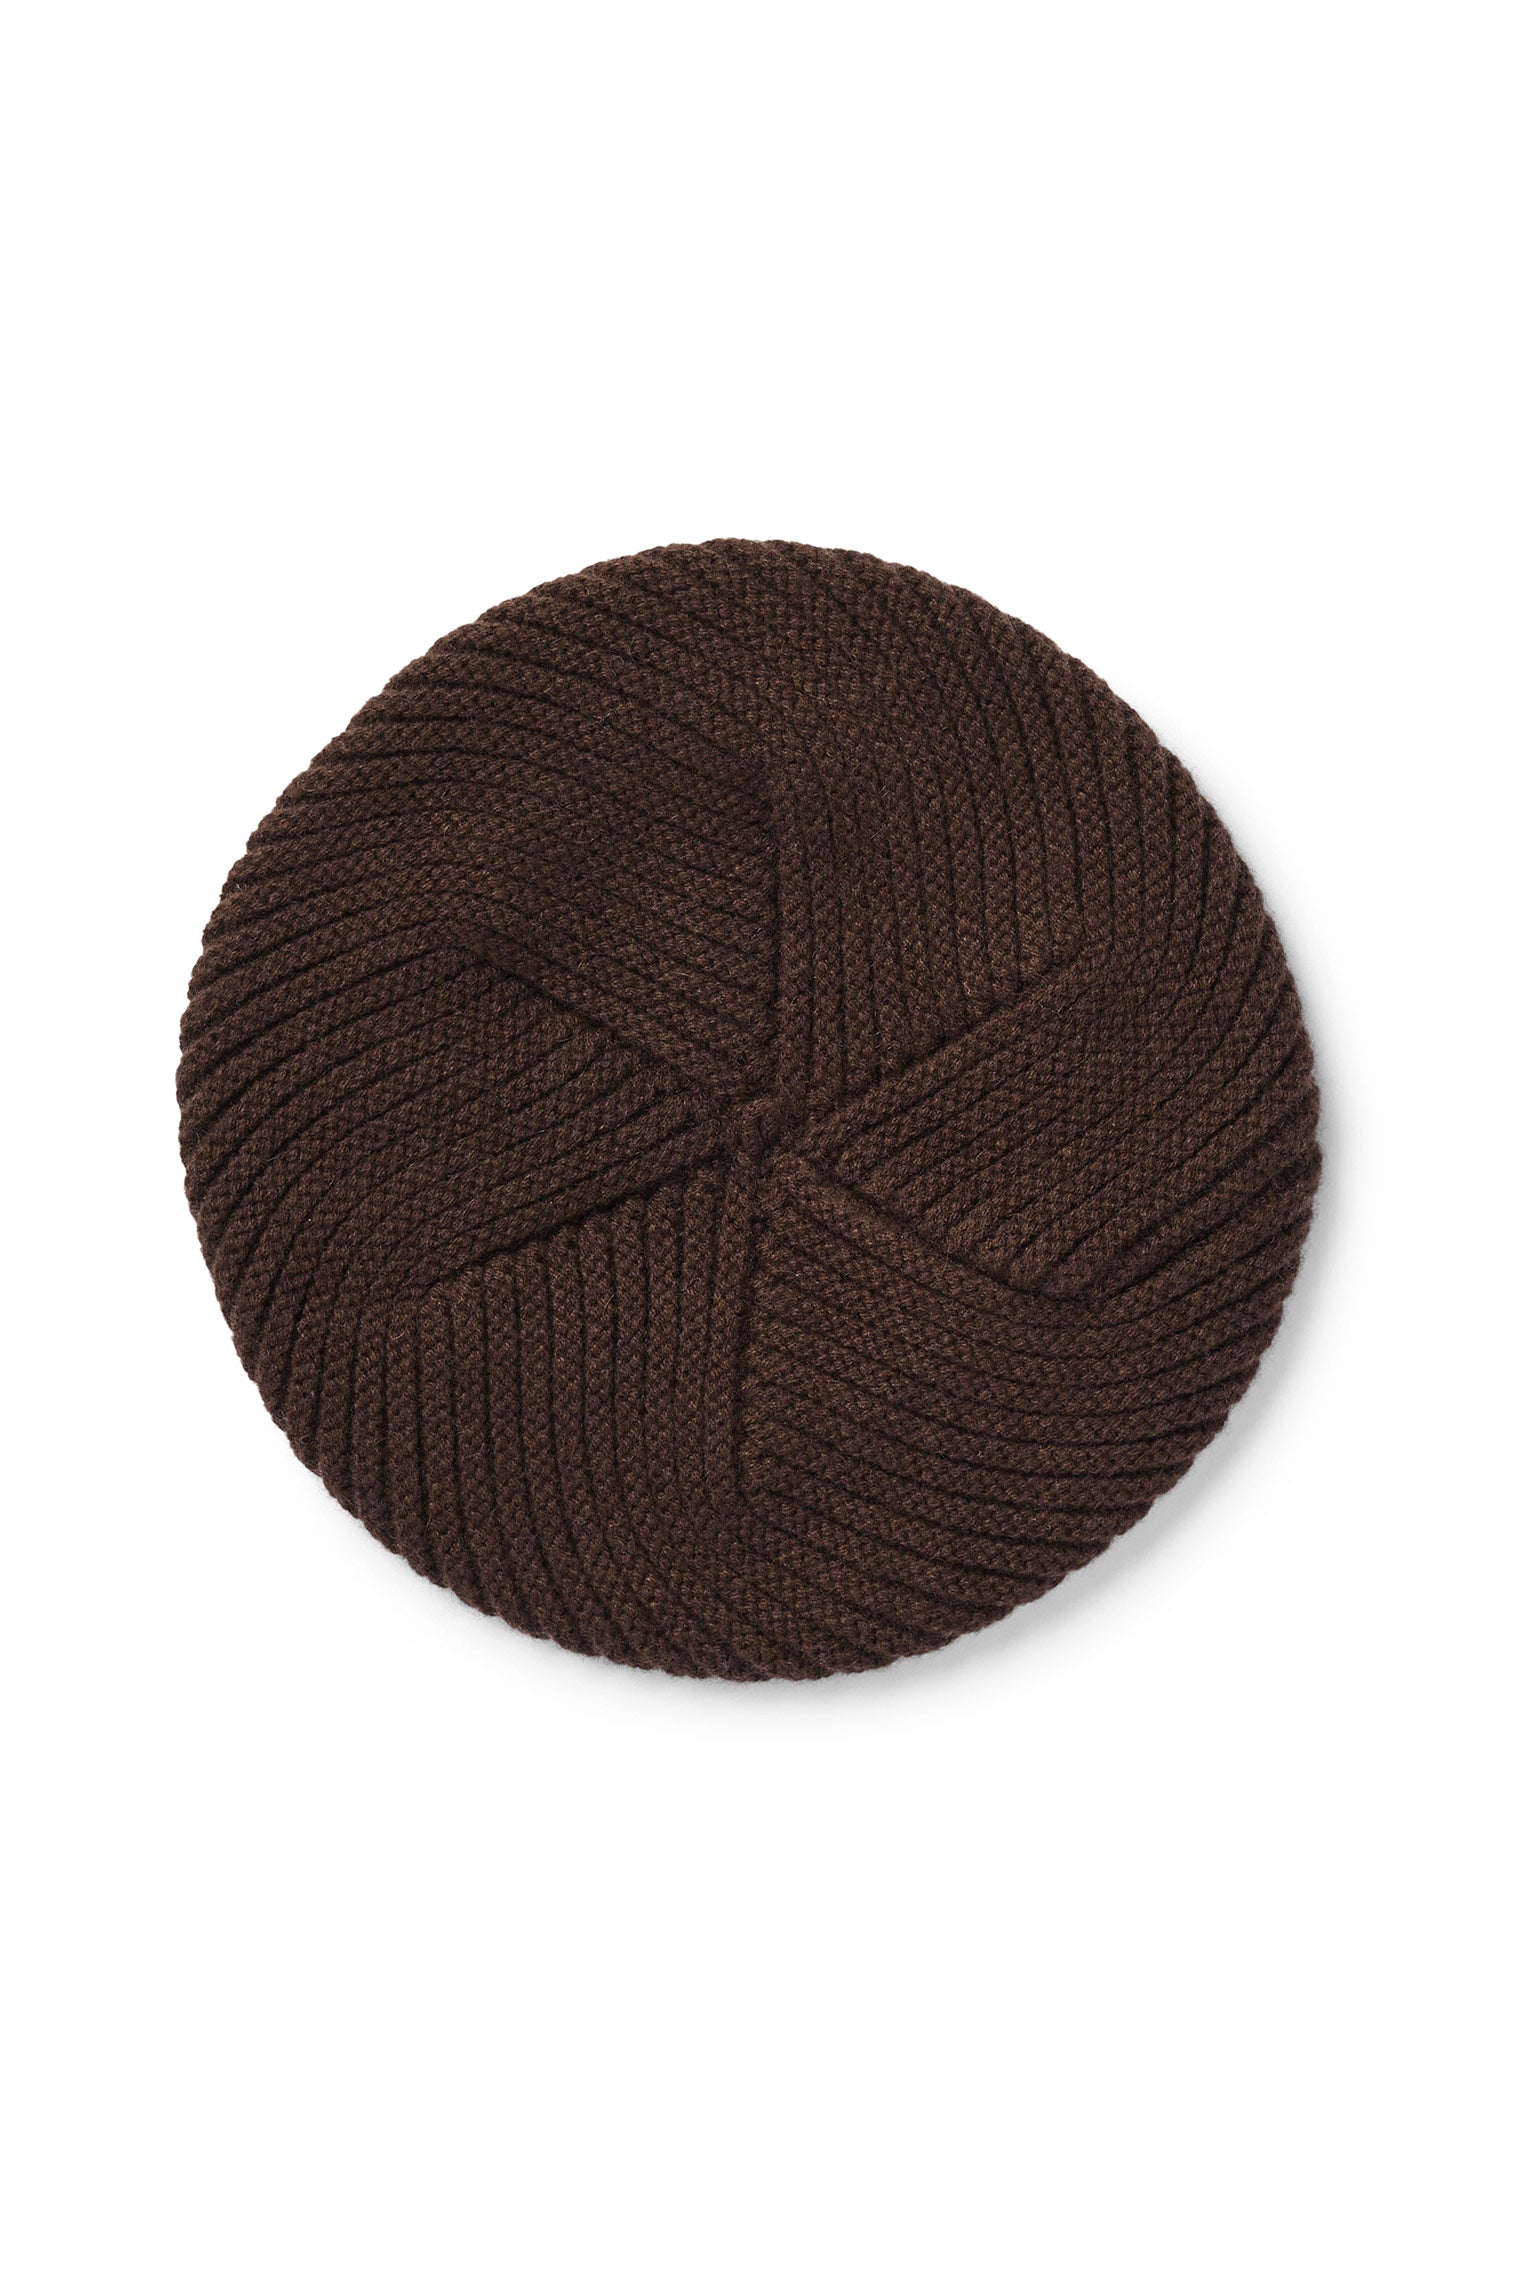 Brown Knitted Cashmere Beret -  - Lock & Co. Hatters London UK